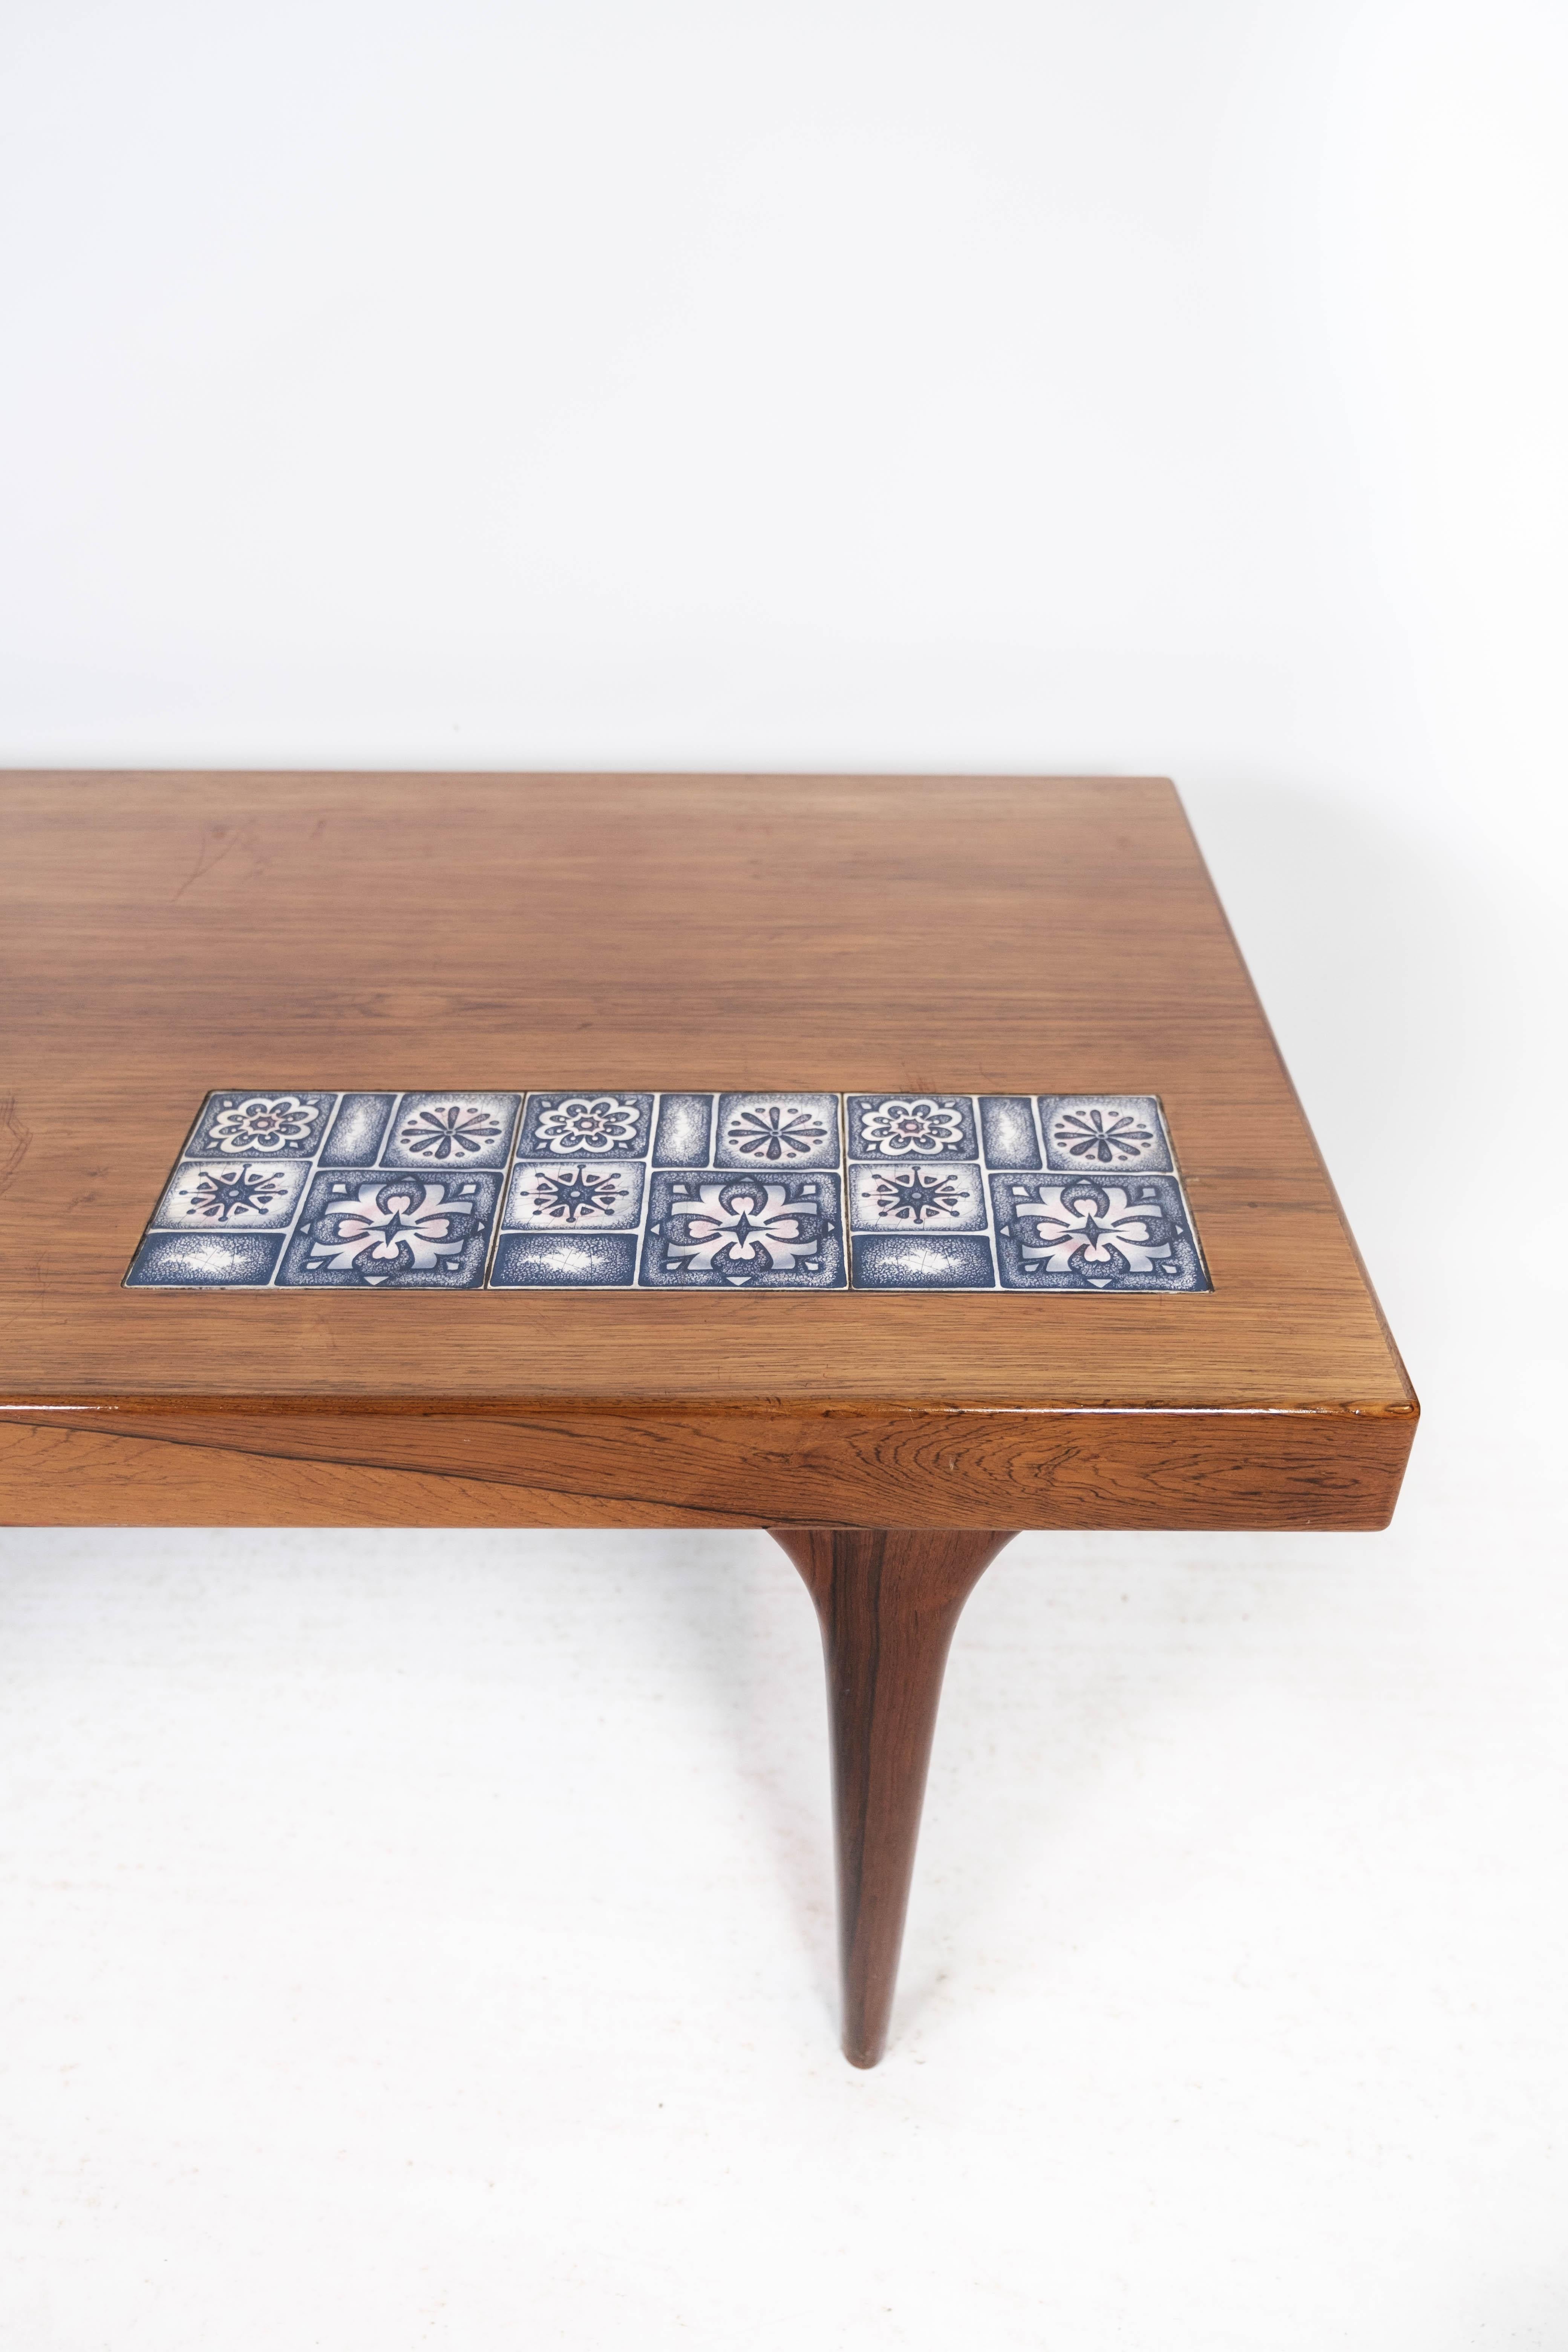 Scandinavian Modern Coffee Table in Rosewood with Blue Tiles Designed by Johannes Andersen, 1960s